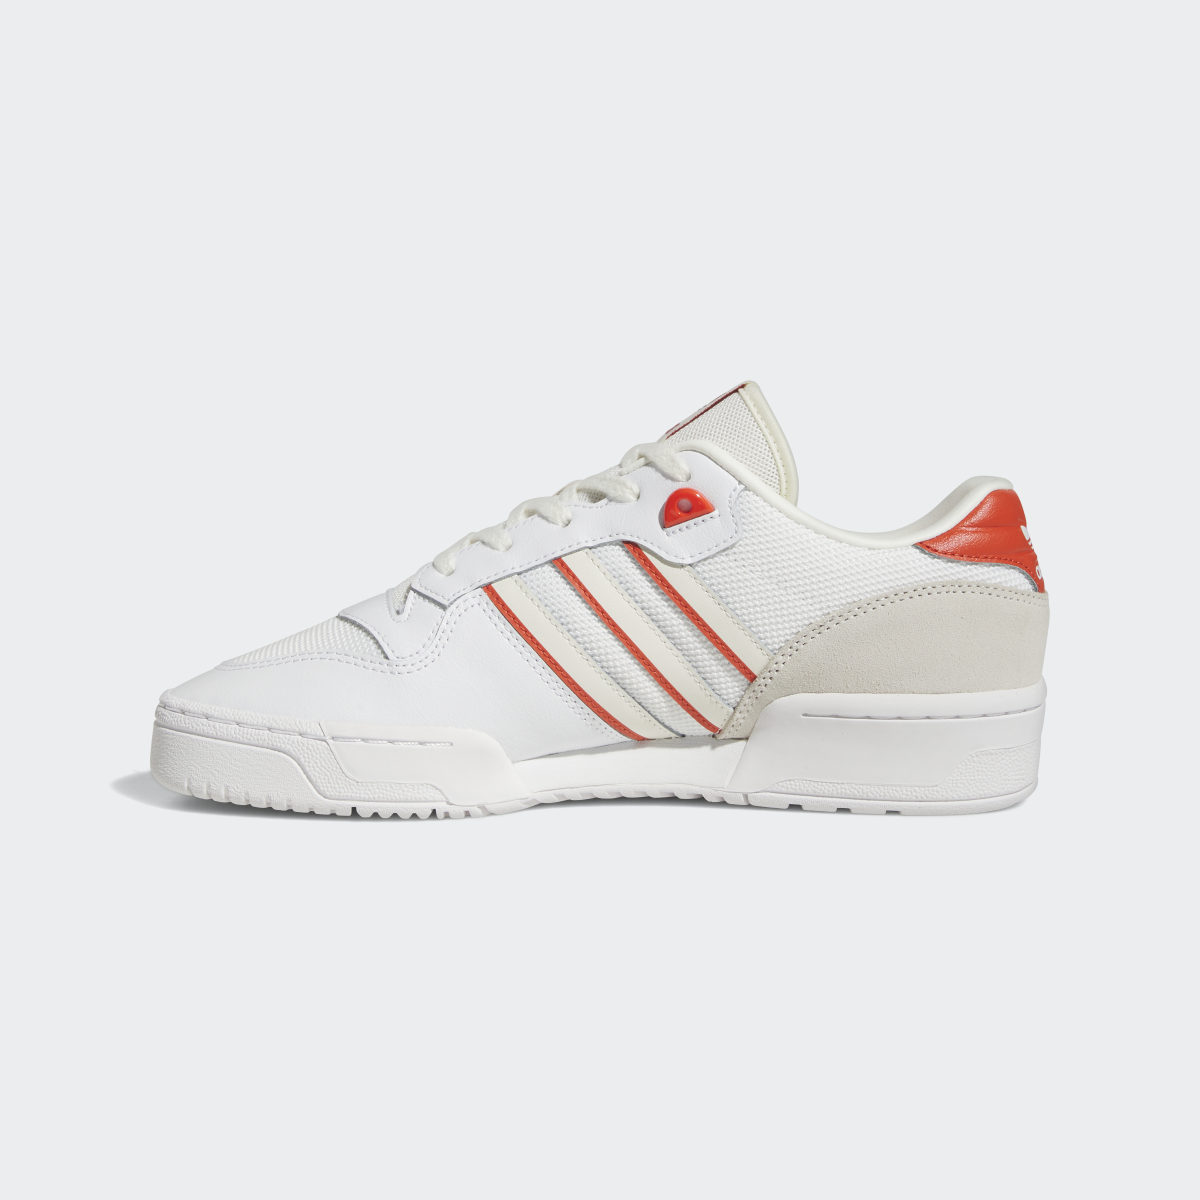 Adidas Sapatilhas Rivalry Low. 7